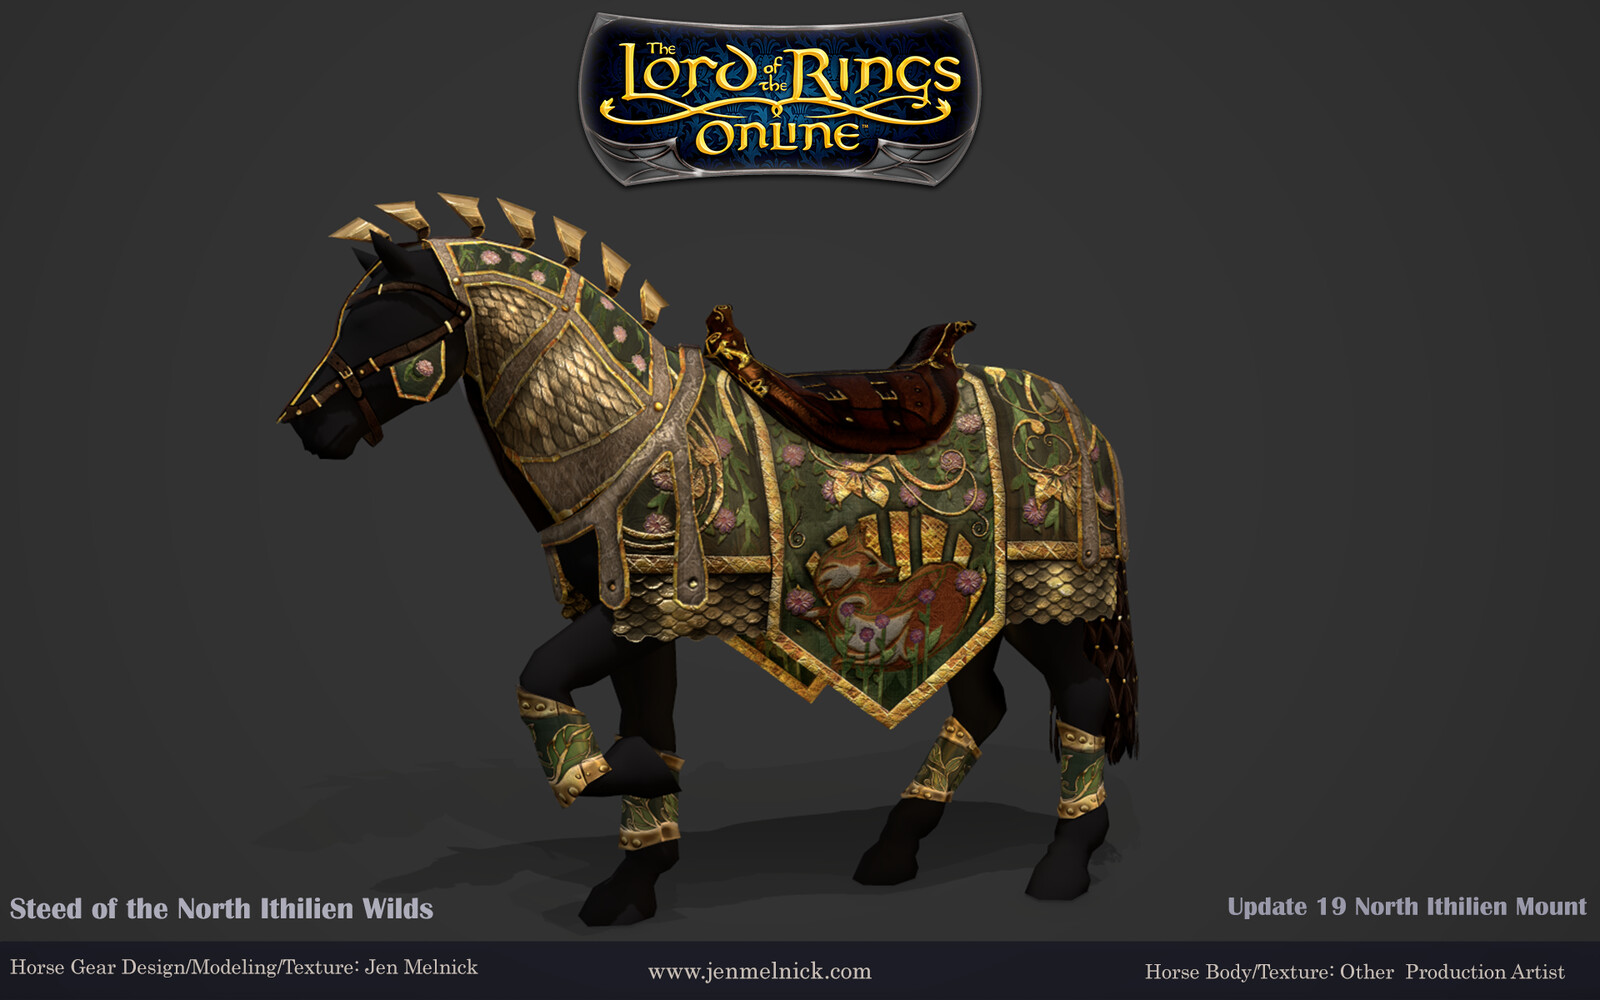 Update 19 North Ithilien Deed Mount
Steed of the North Ithilien Wilds
Marmoset Render